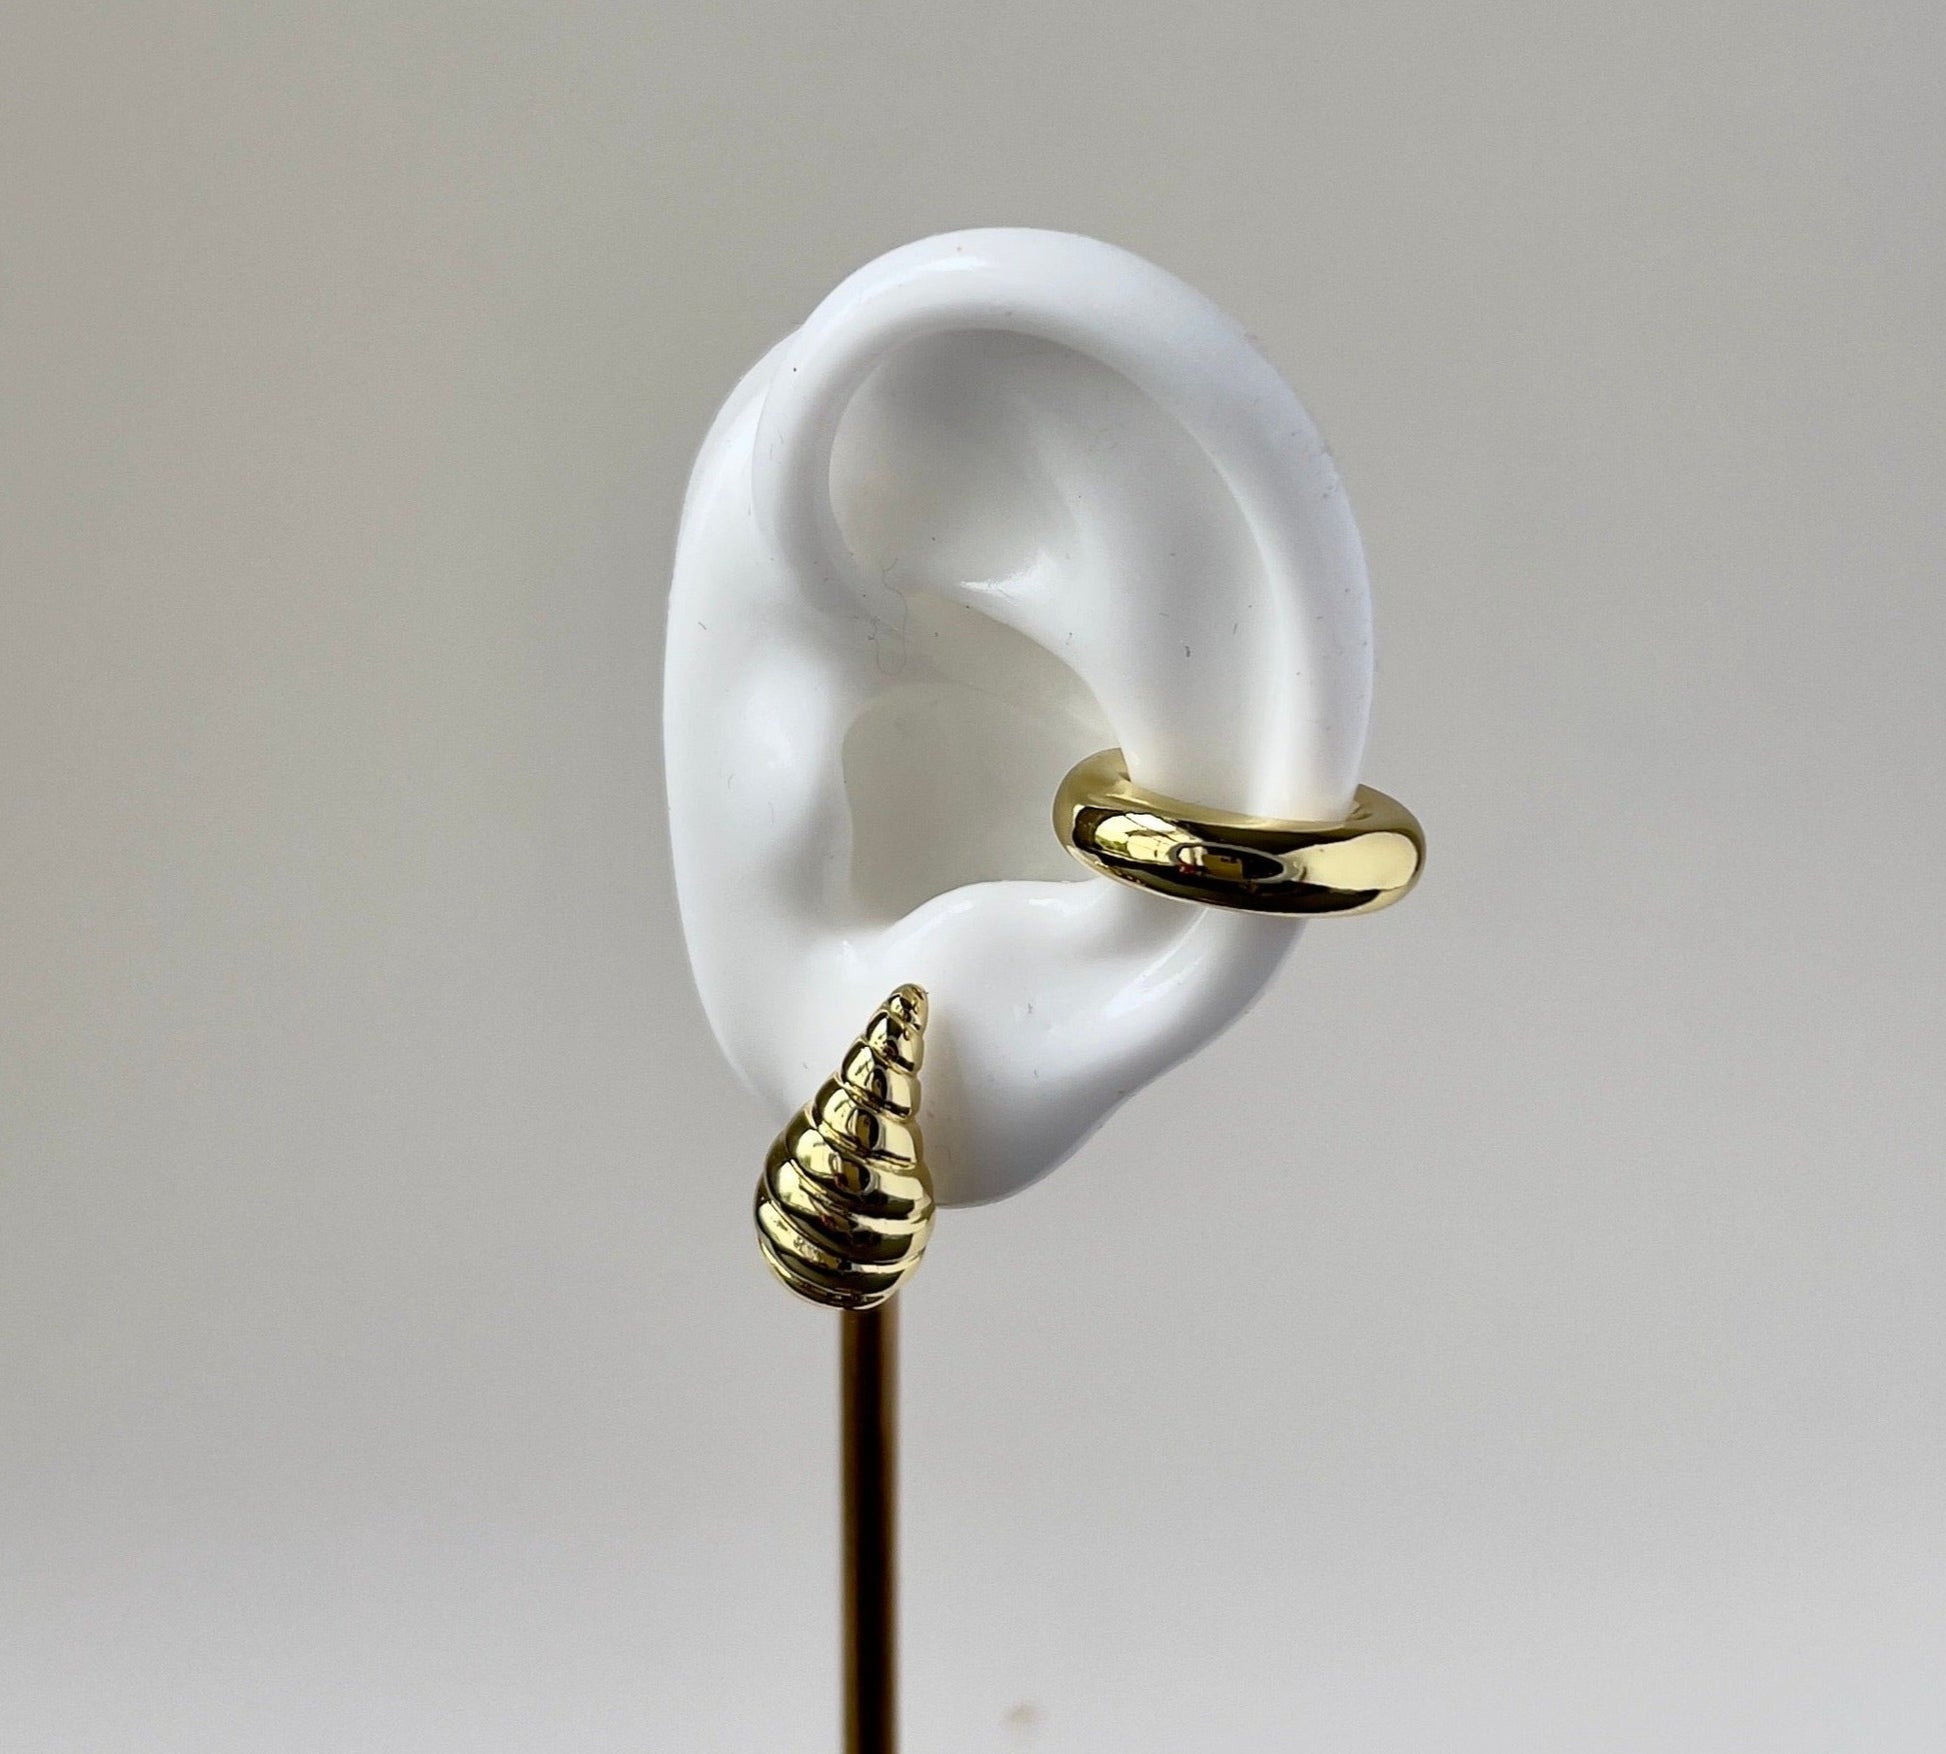 shell shape small gold earring in a silicon ear